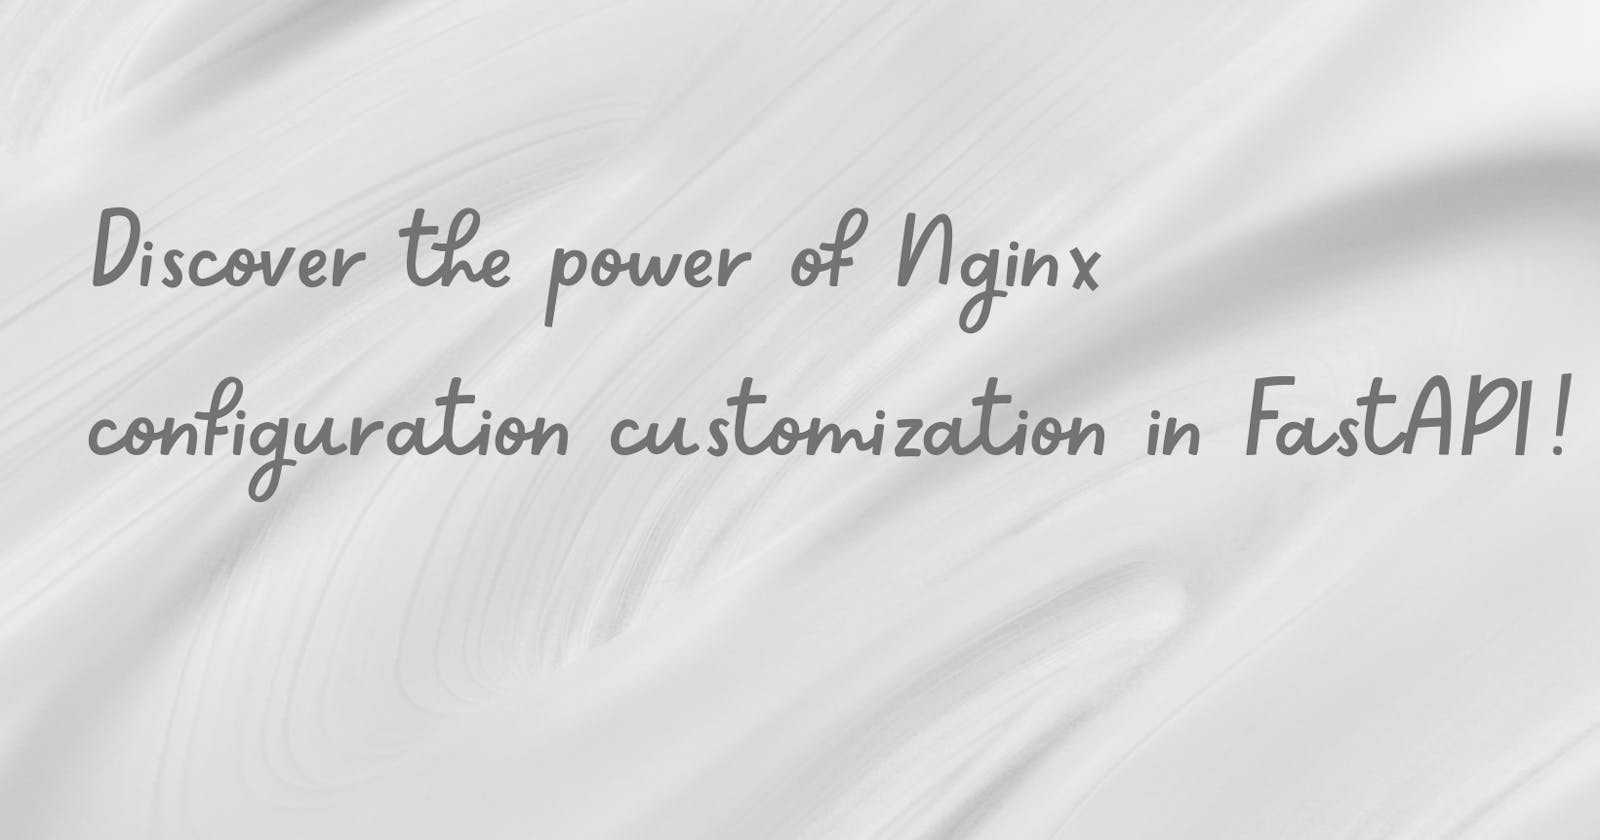 Modifying Nginx Configuration through a File in the FastAPI application